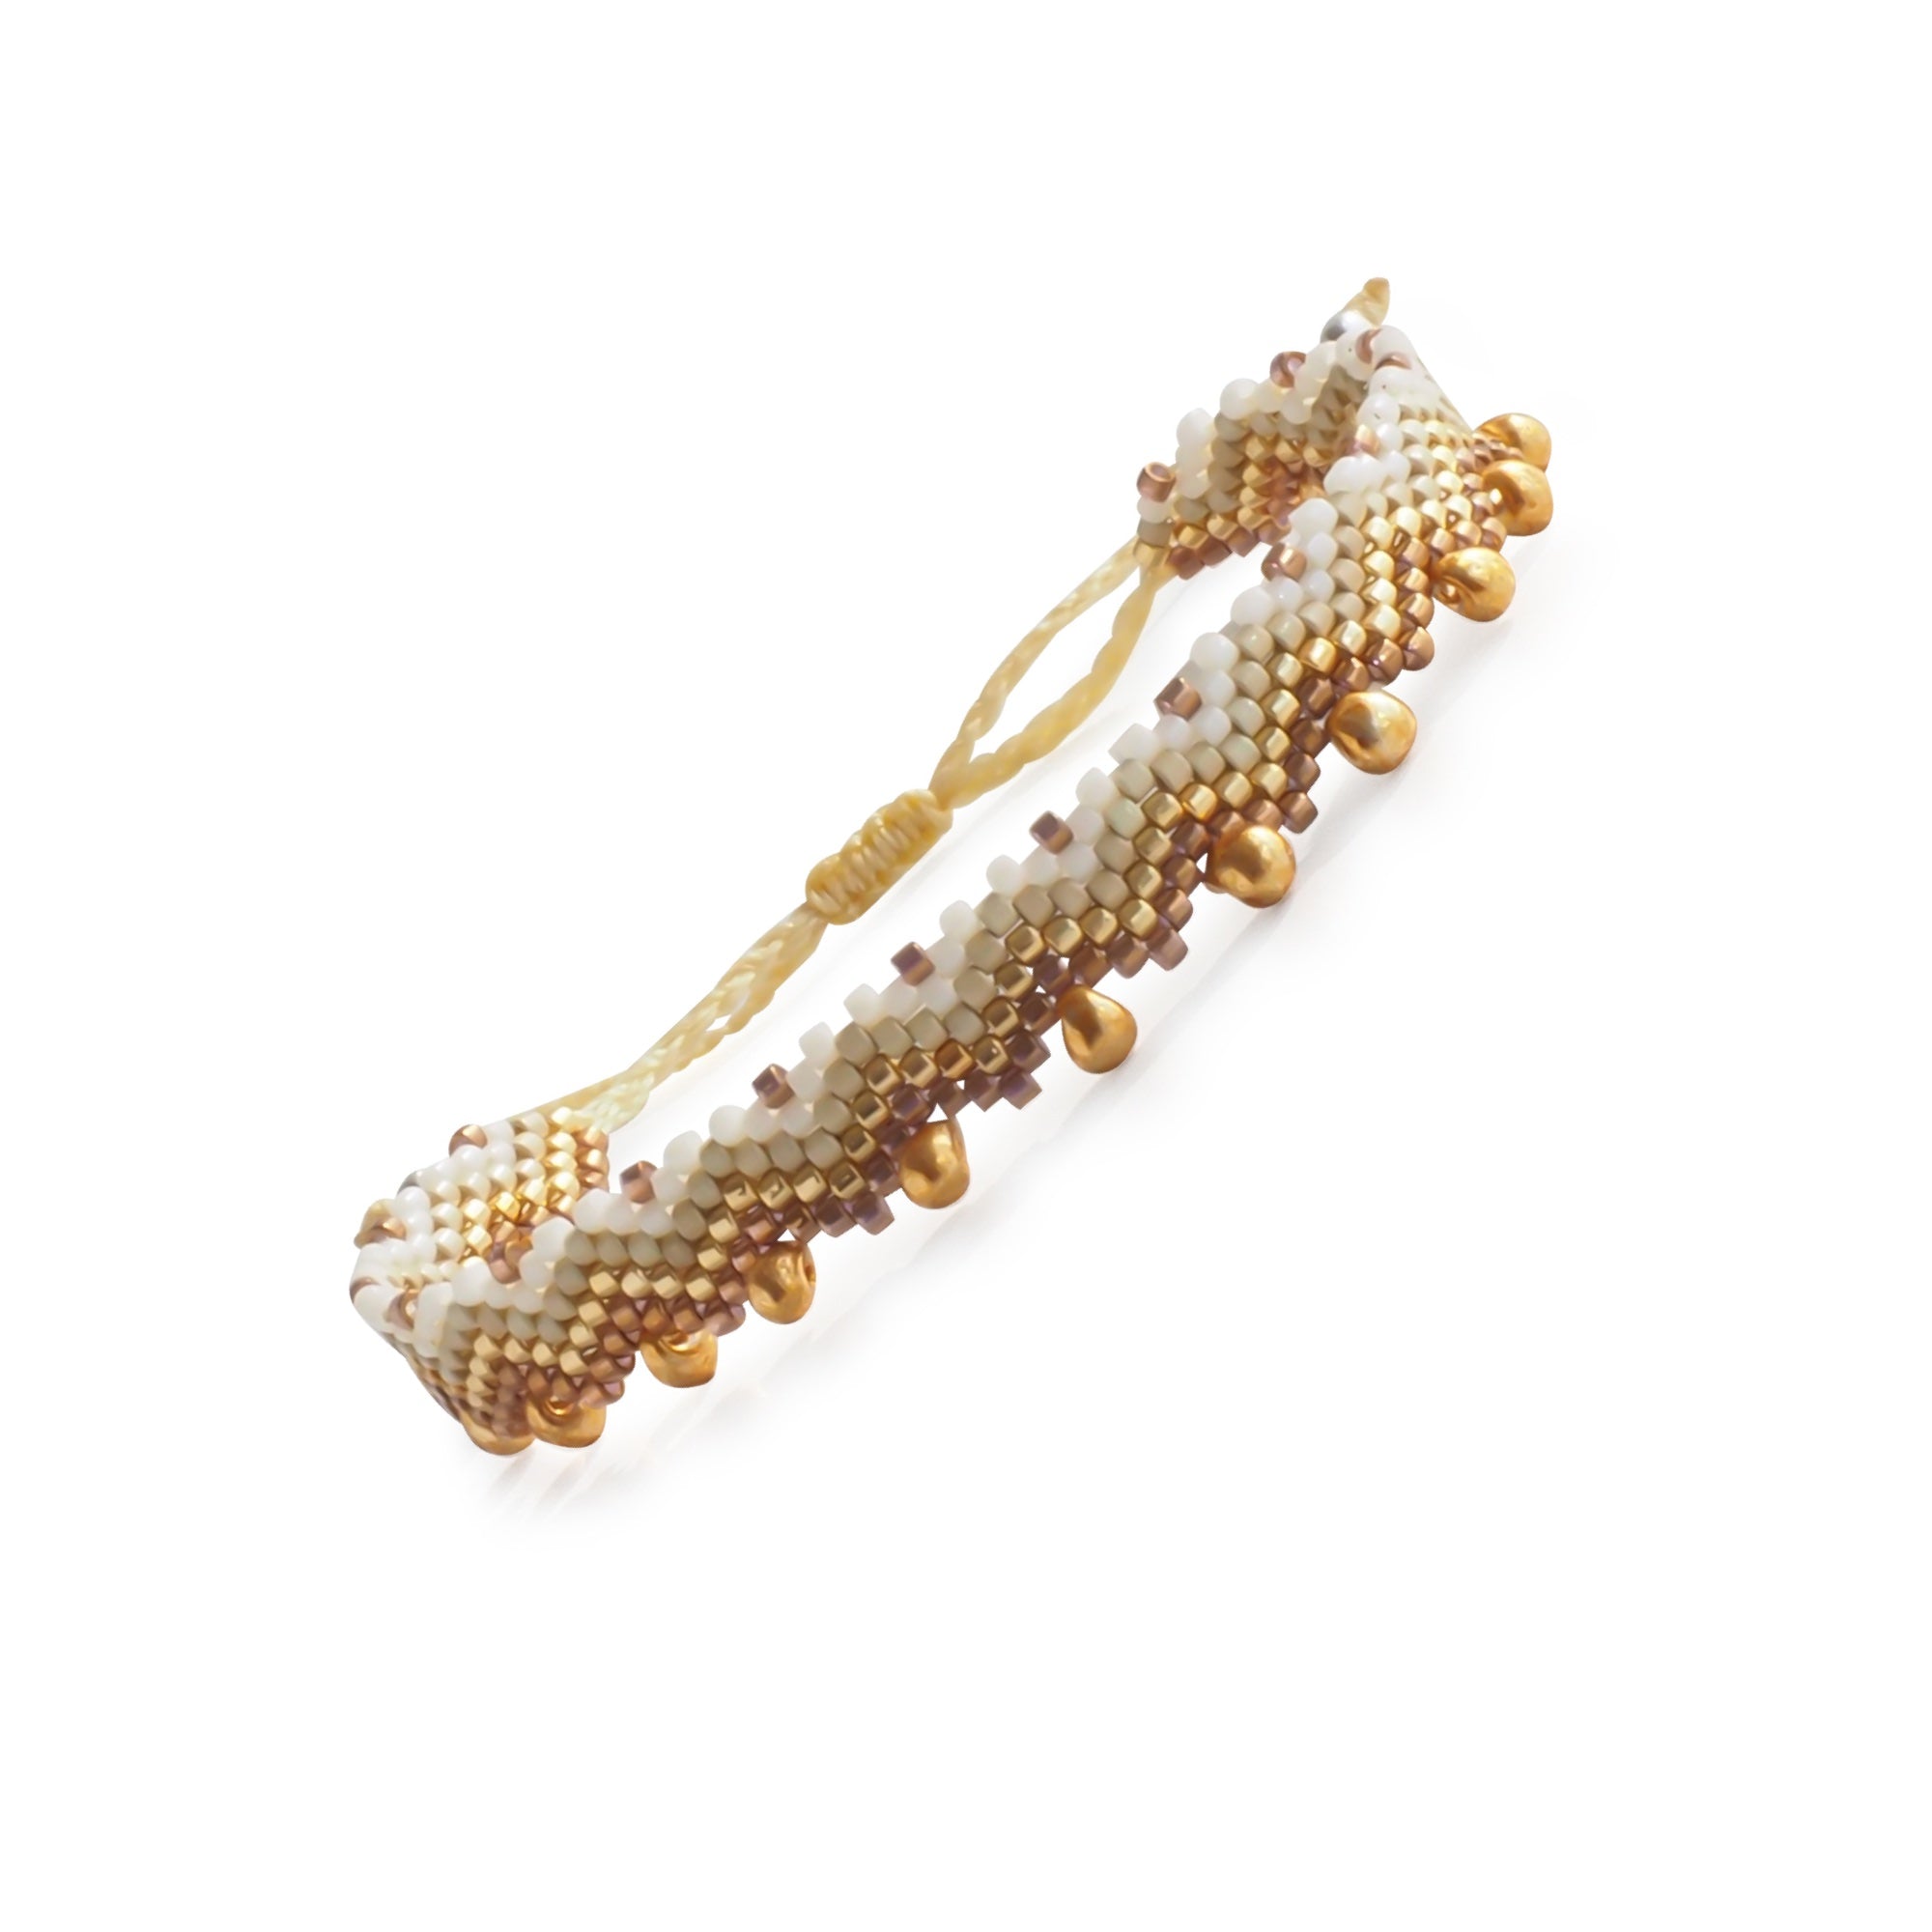 Seed Bead Loom Bracelet Gold and White